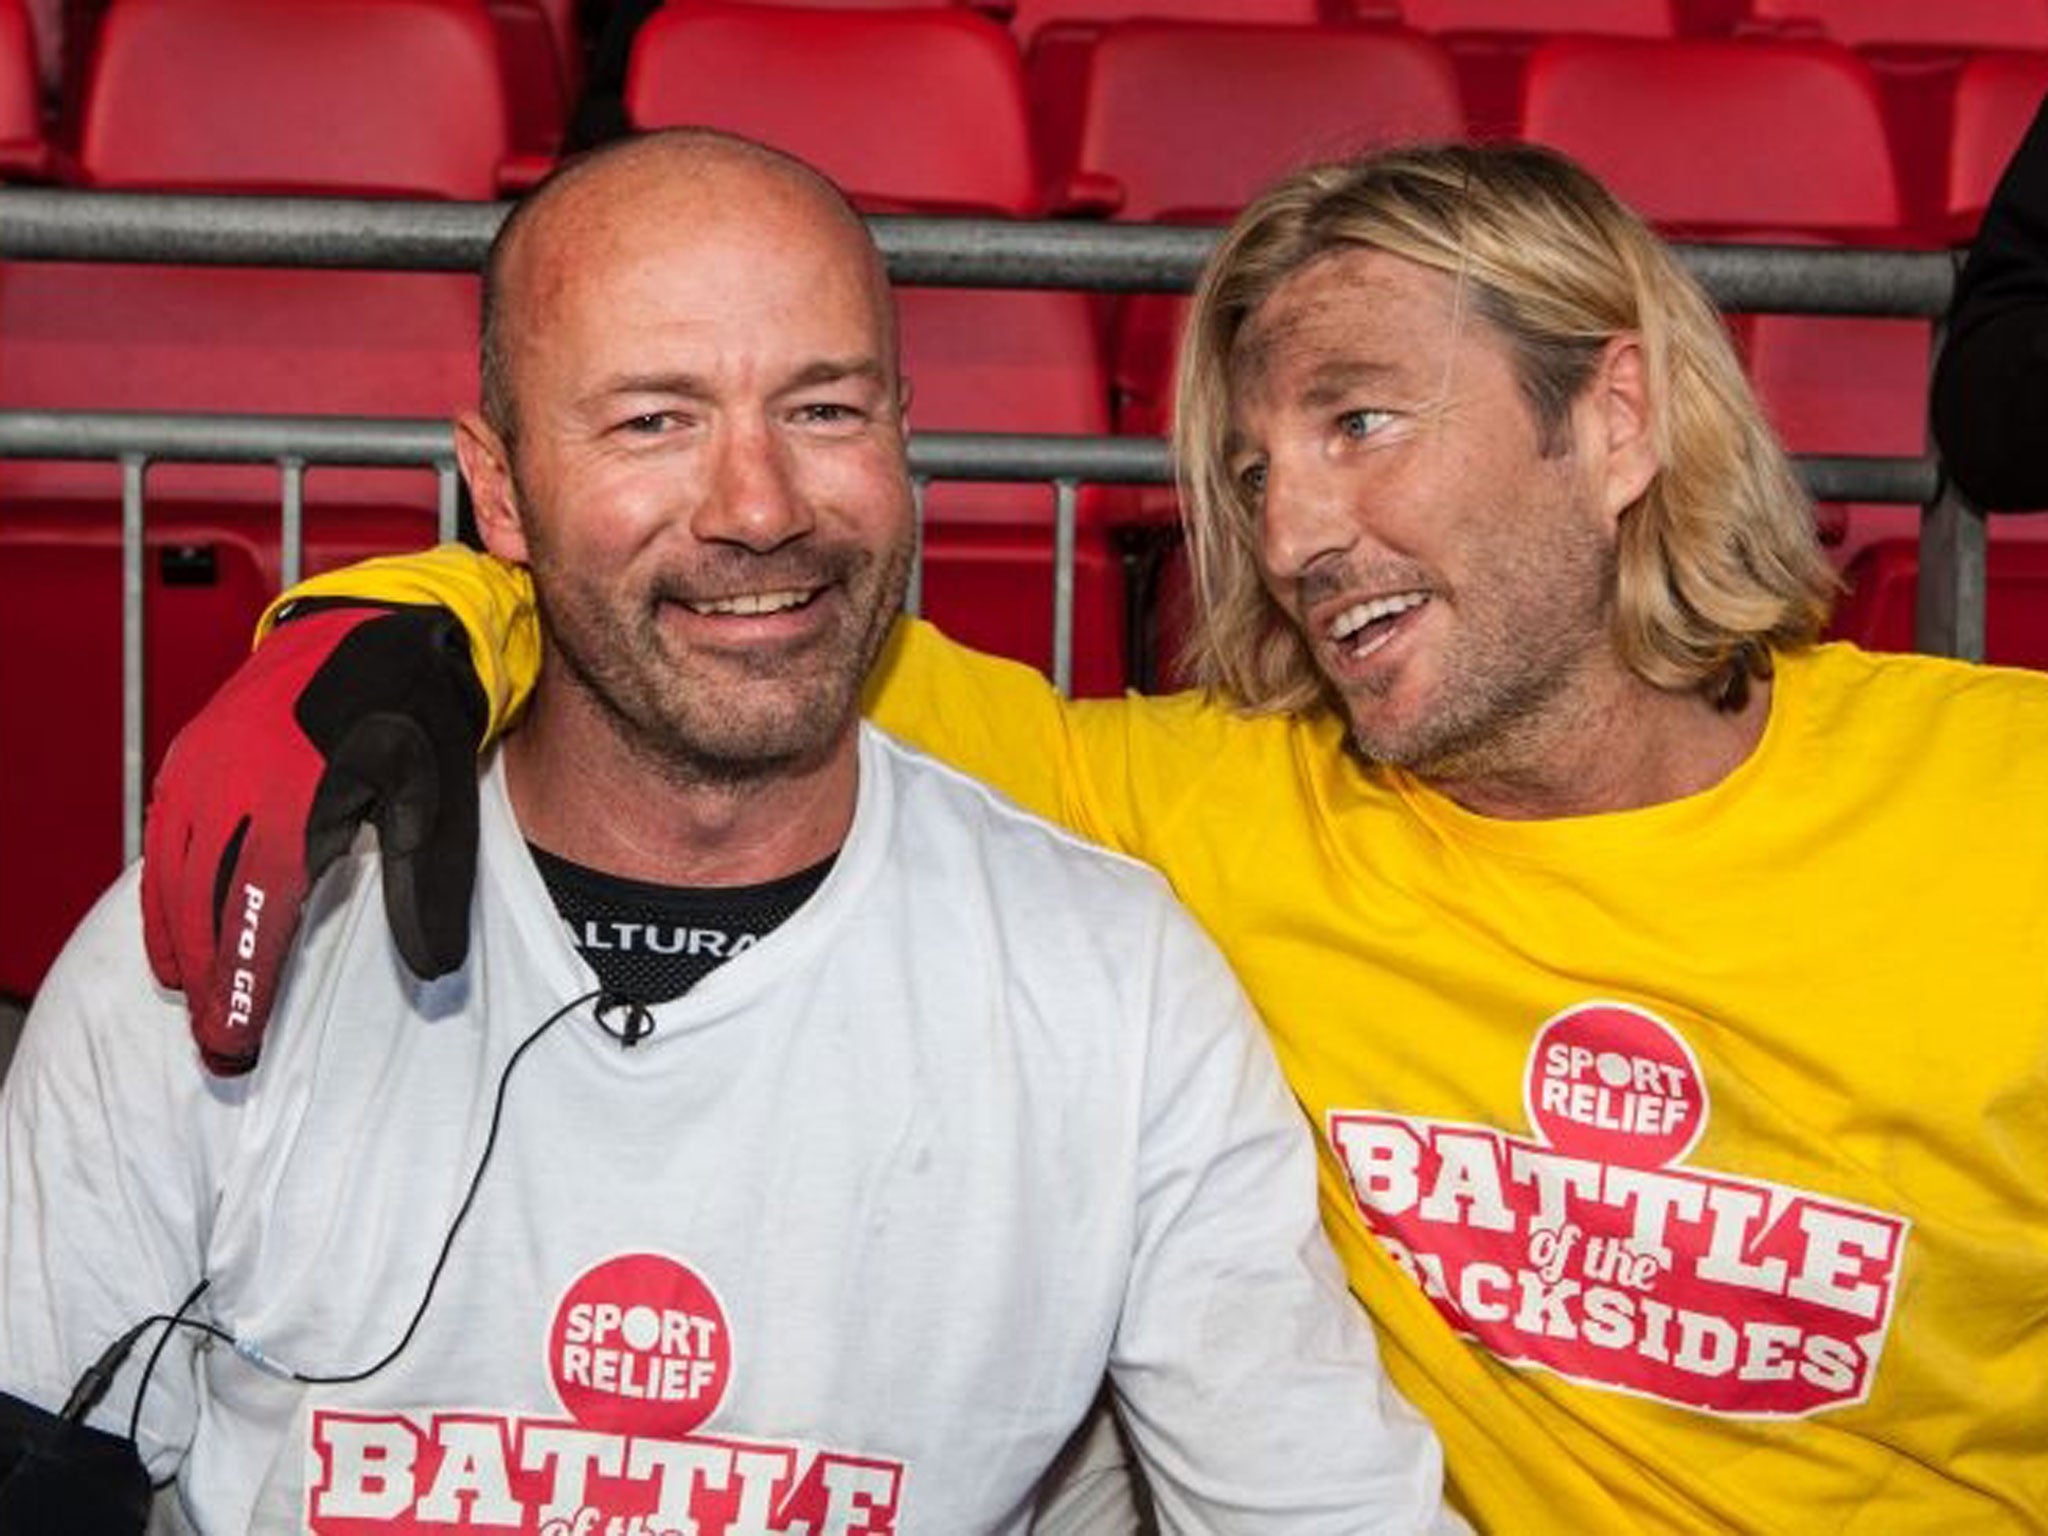 Alan Shearer (left) has been crowned winner of the Battle of the Backsides for Sport Relief, beating fellow competitor Robbie Savage (right) in their race to be the first to sit on half the seats in the iconic Wembley Stadium.